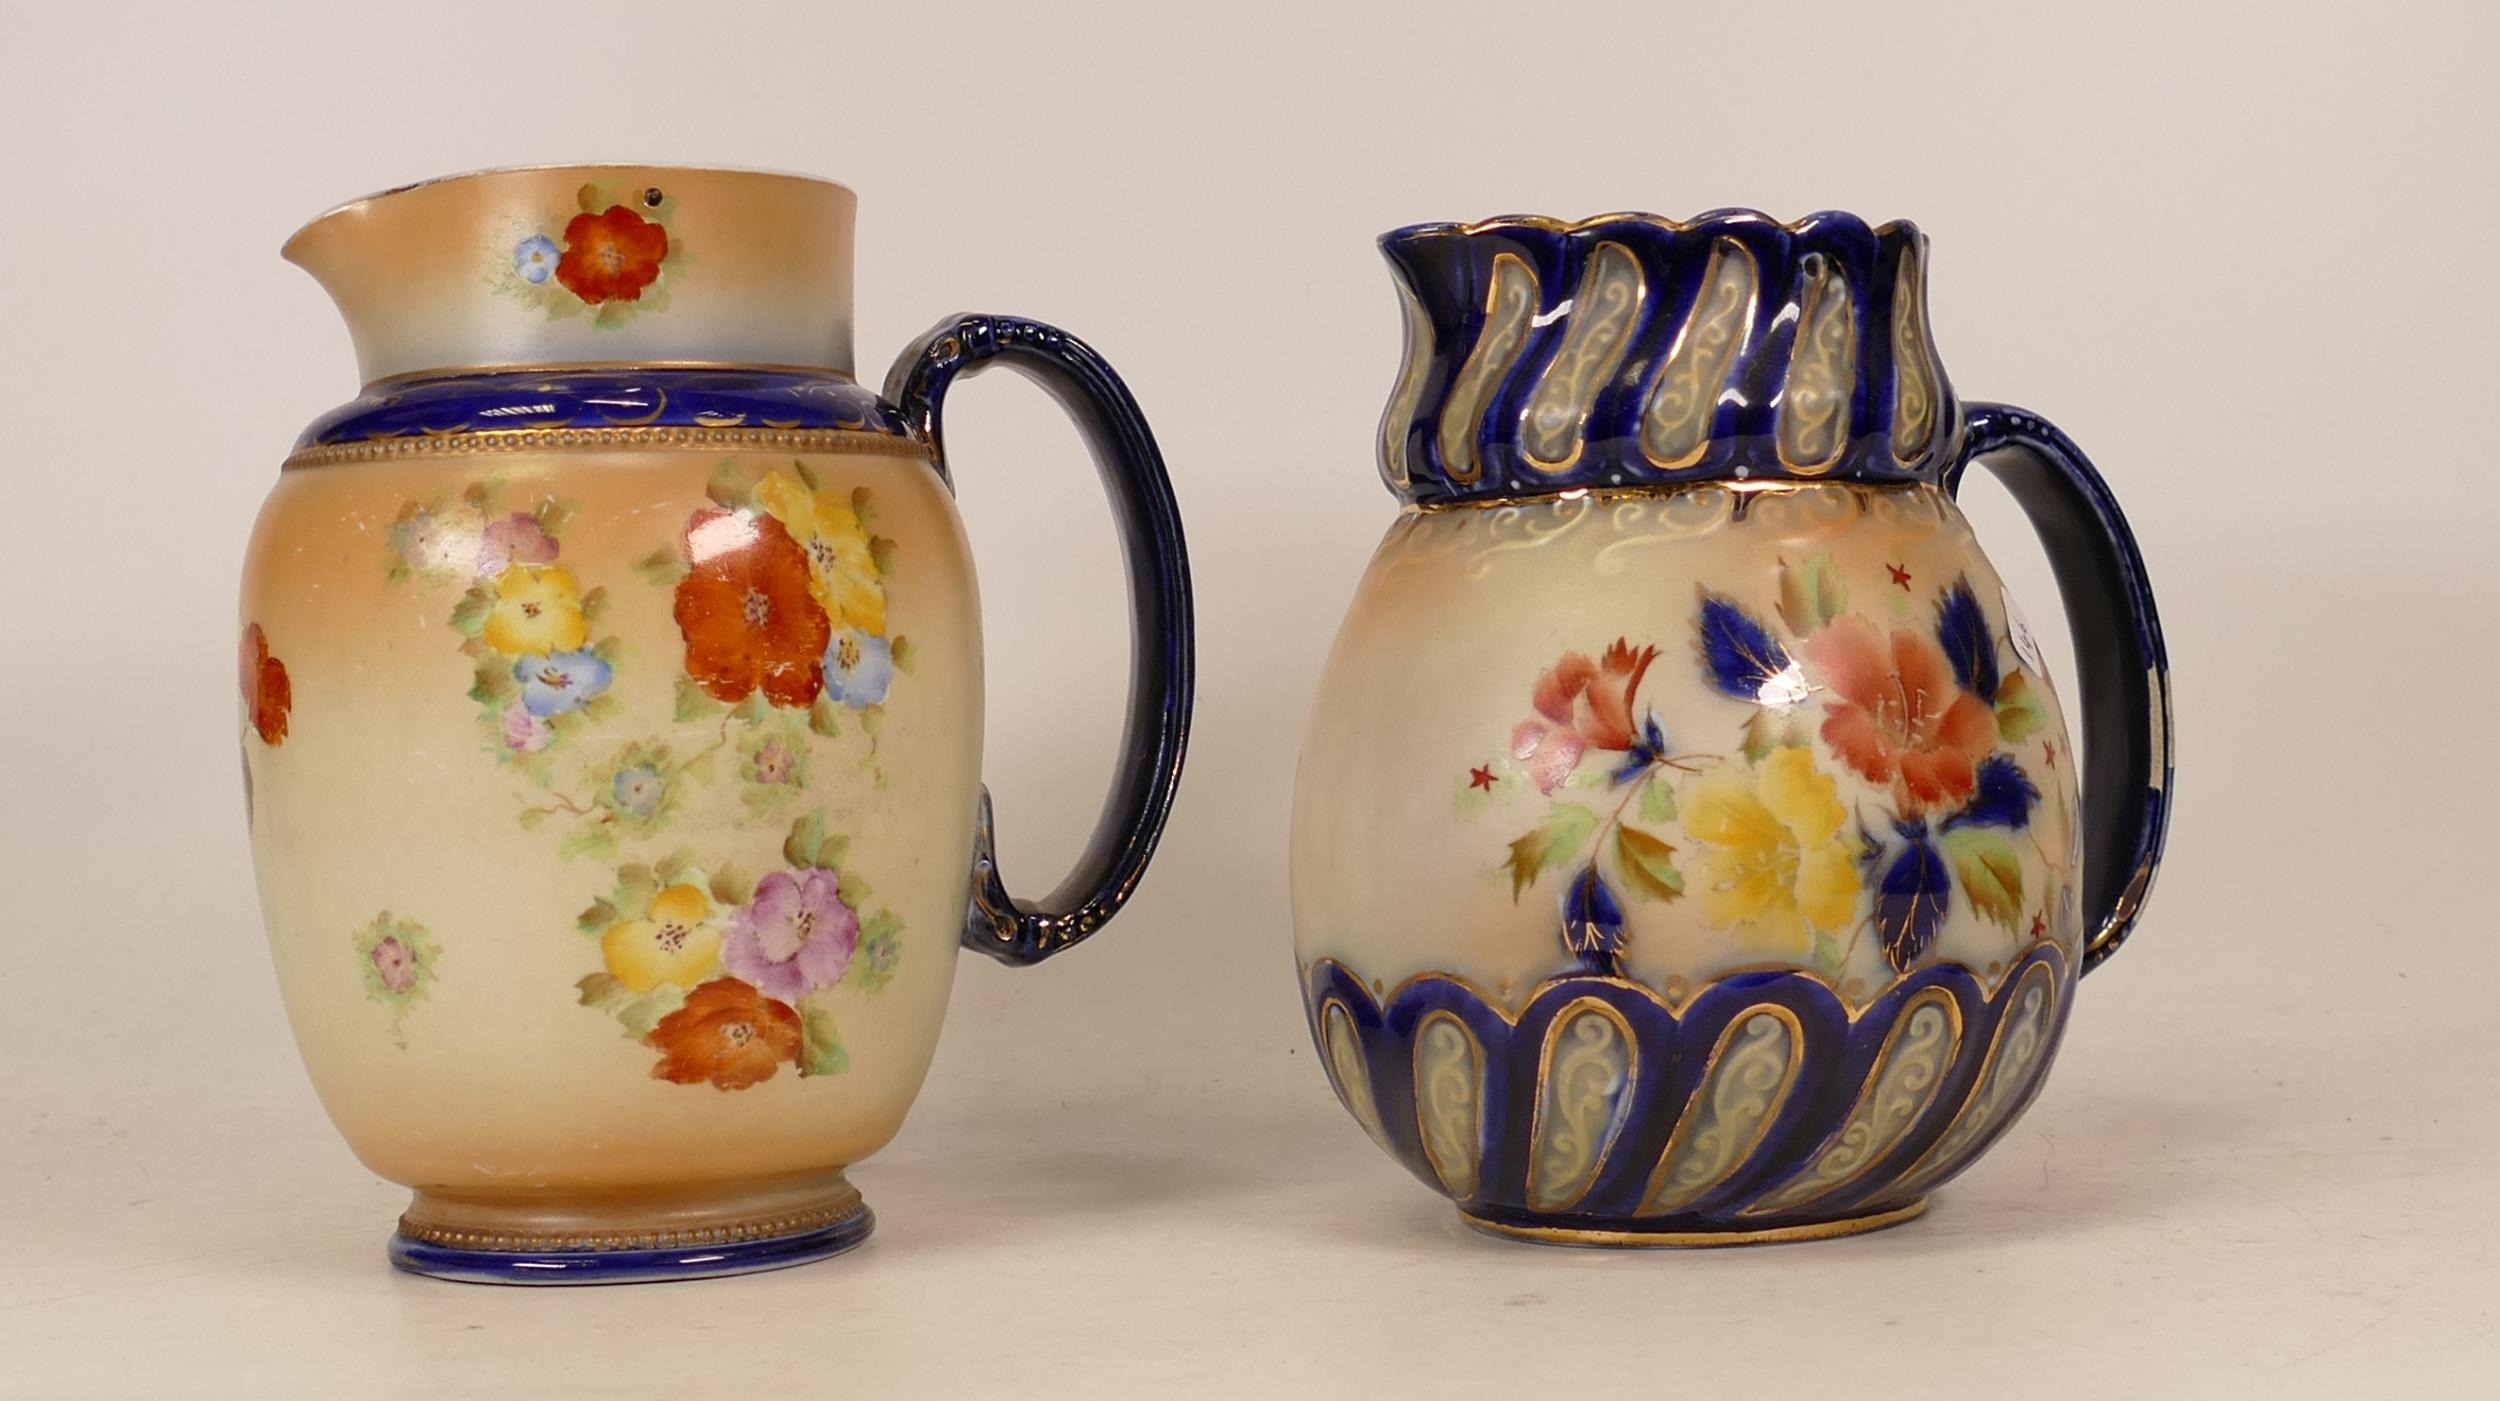 Carlton Ware Camellia patterned jug together with a Polyanthus patterned jug. Height 16cm (2)